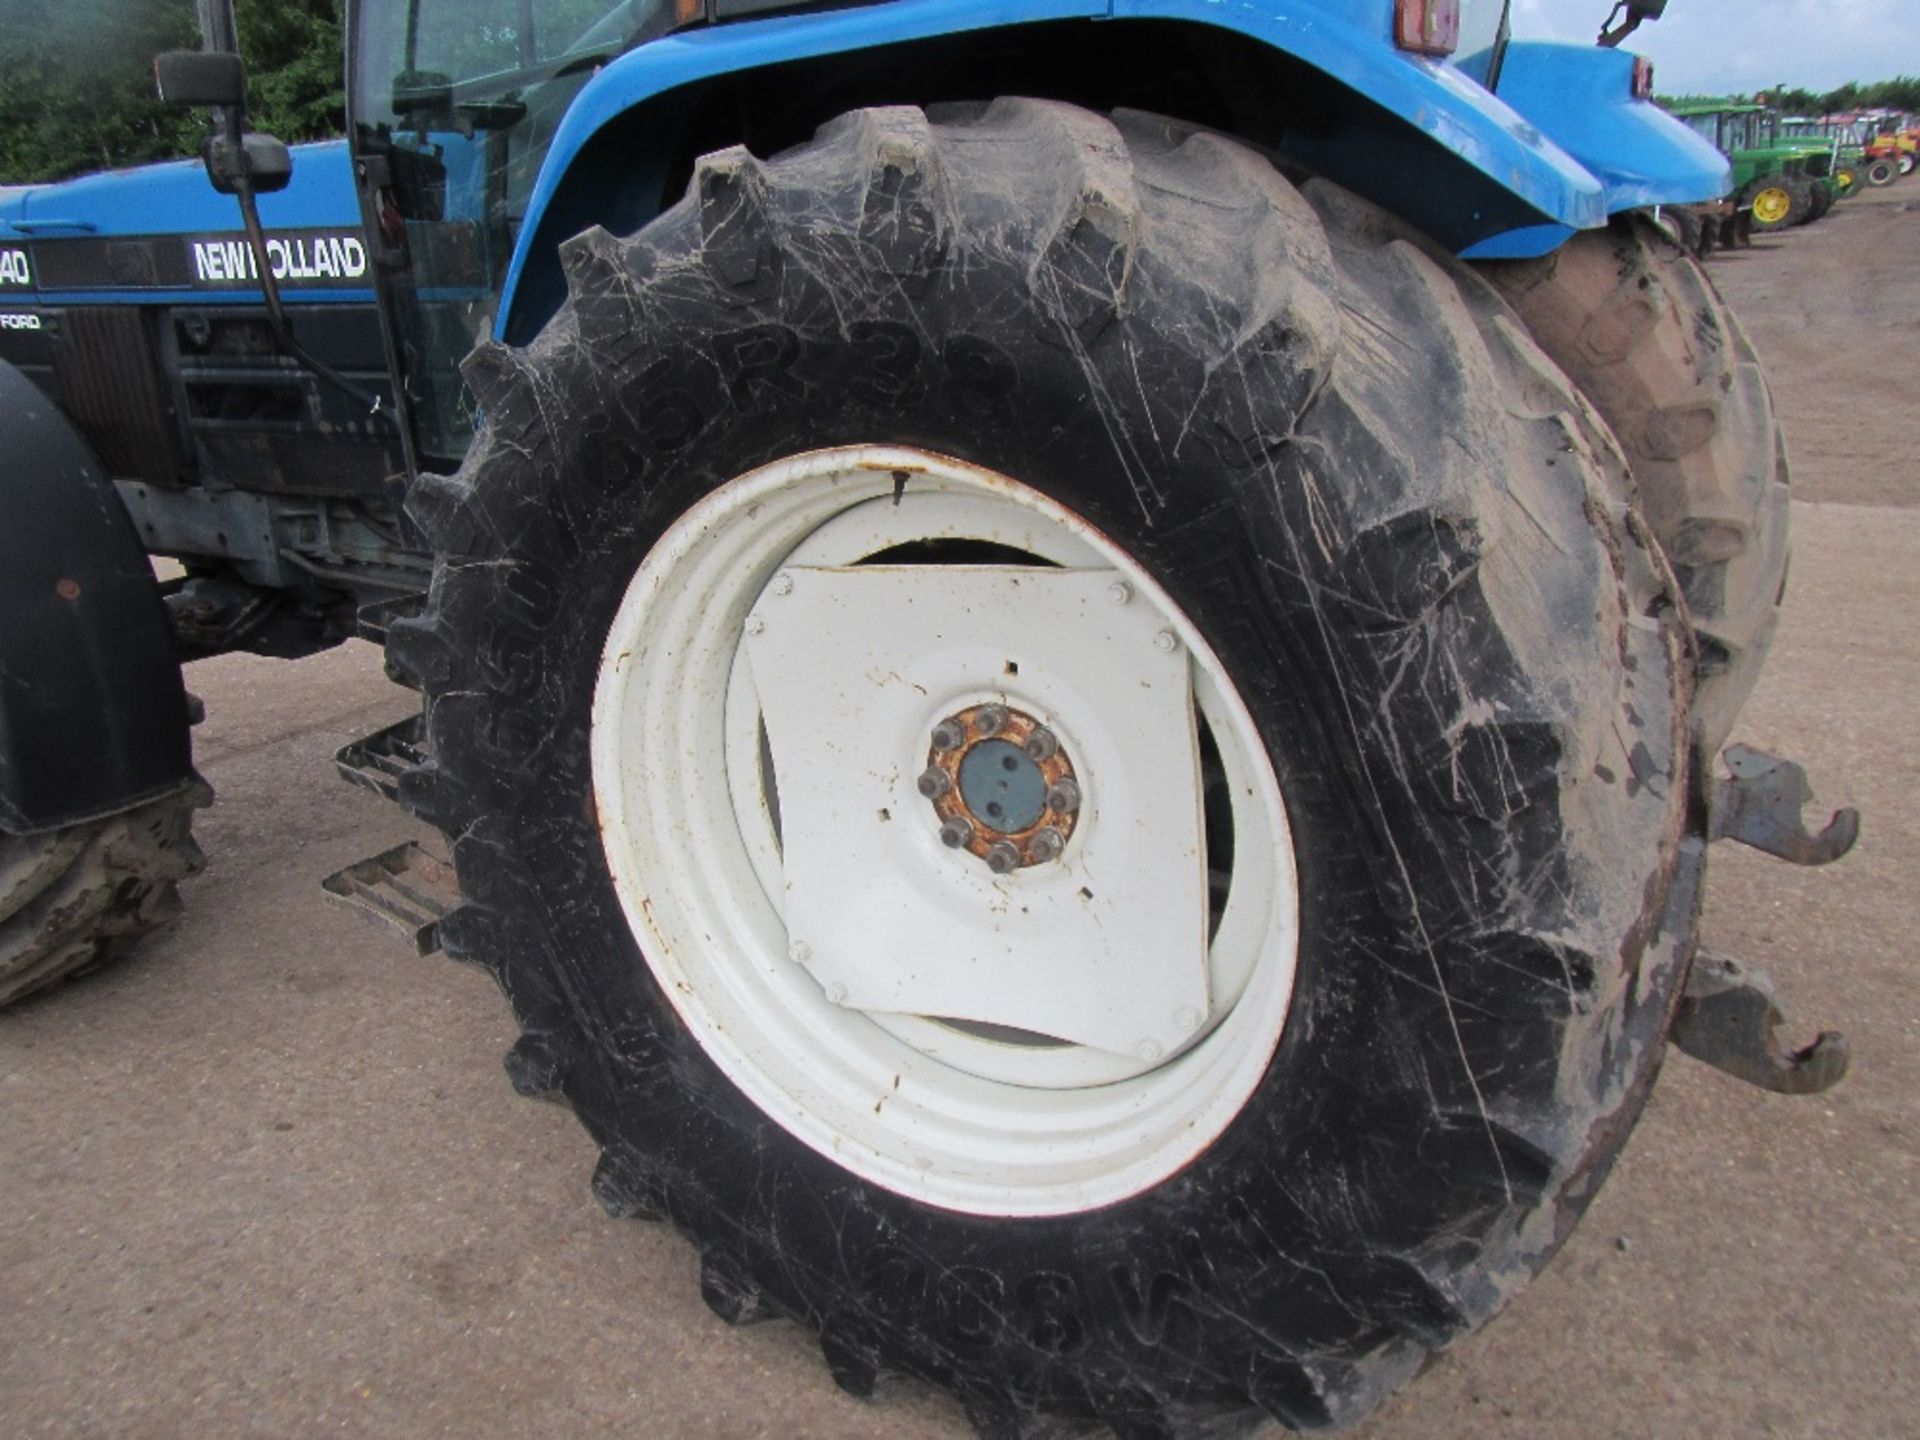 New Holland 8340 SLE 4wd Tractor. V5 will be supplied Reg. No. N243 SCN Ser. No. 025324B - Image 10 of 18